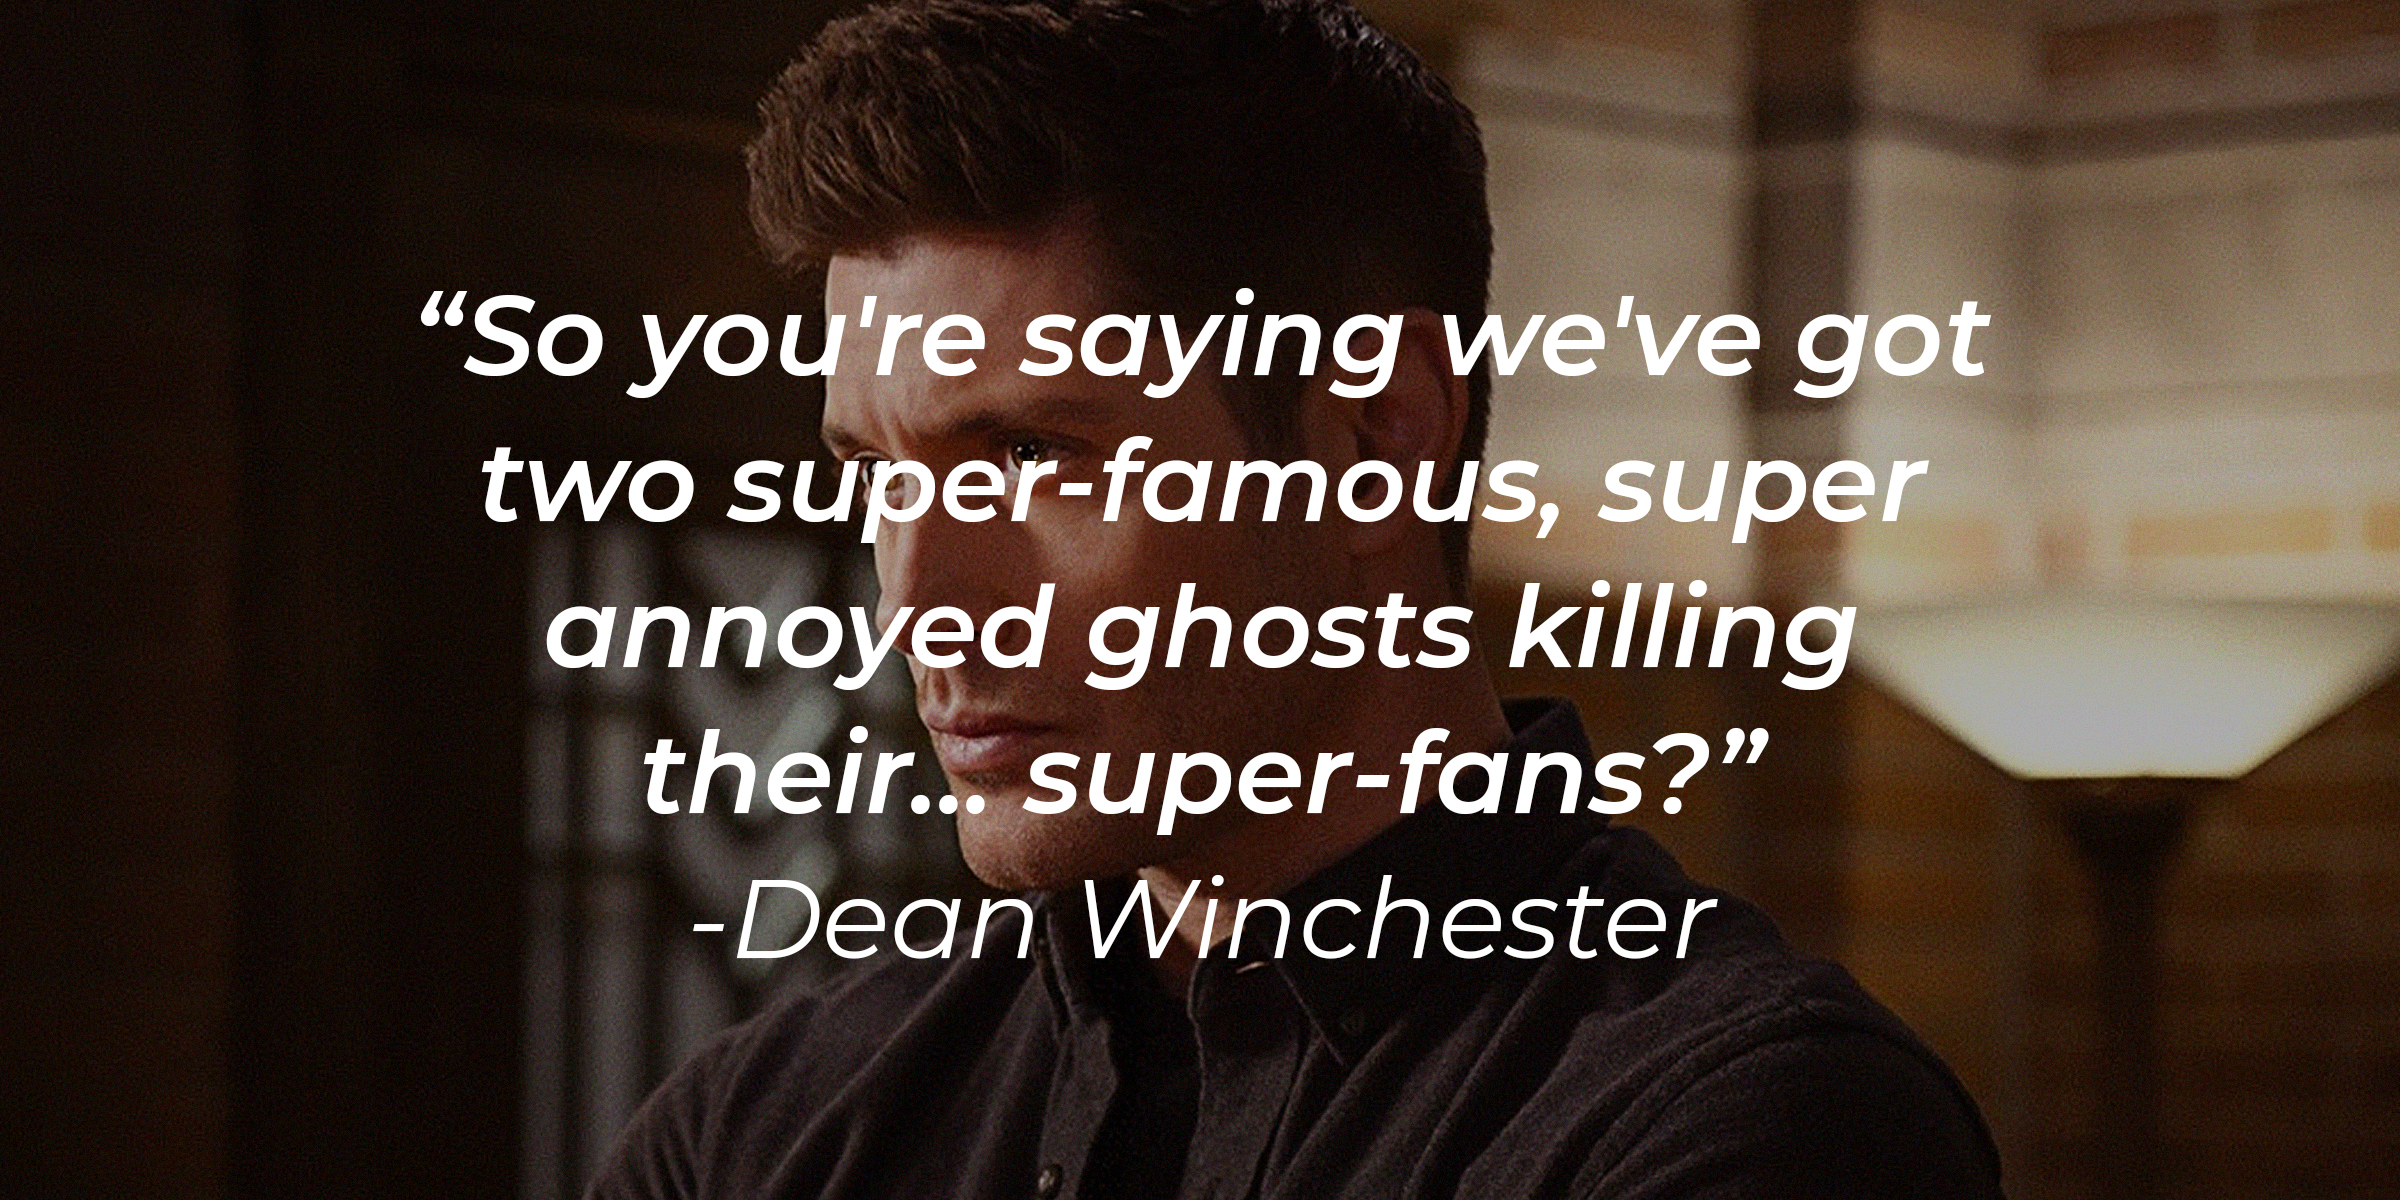 A photo of Dean Winchester with Dean Winchester's quote: “So you're saying we've got two super-famous, super annoyed ghosts killing their... super-fans?” | Source: facebook.com/Supernatural